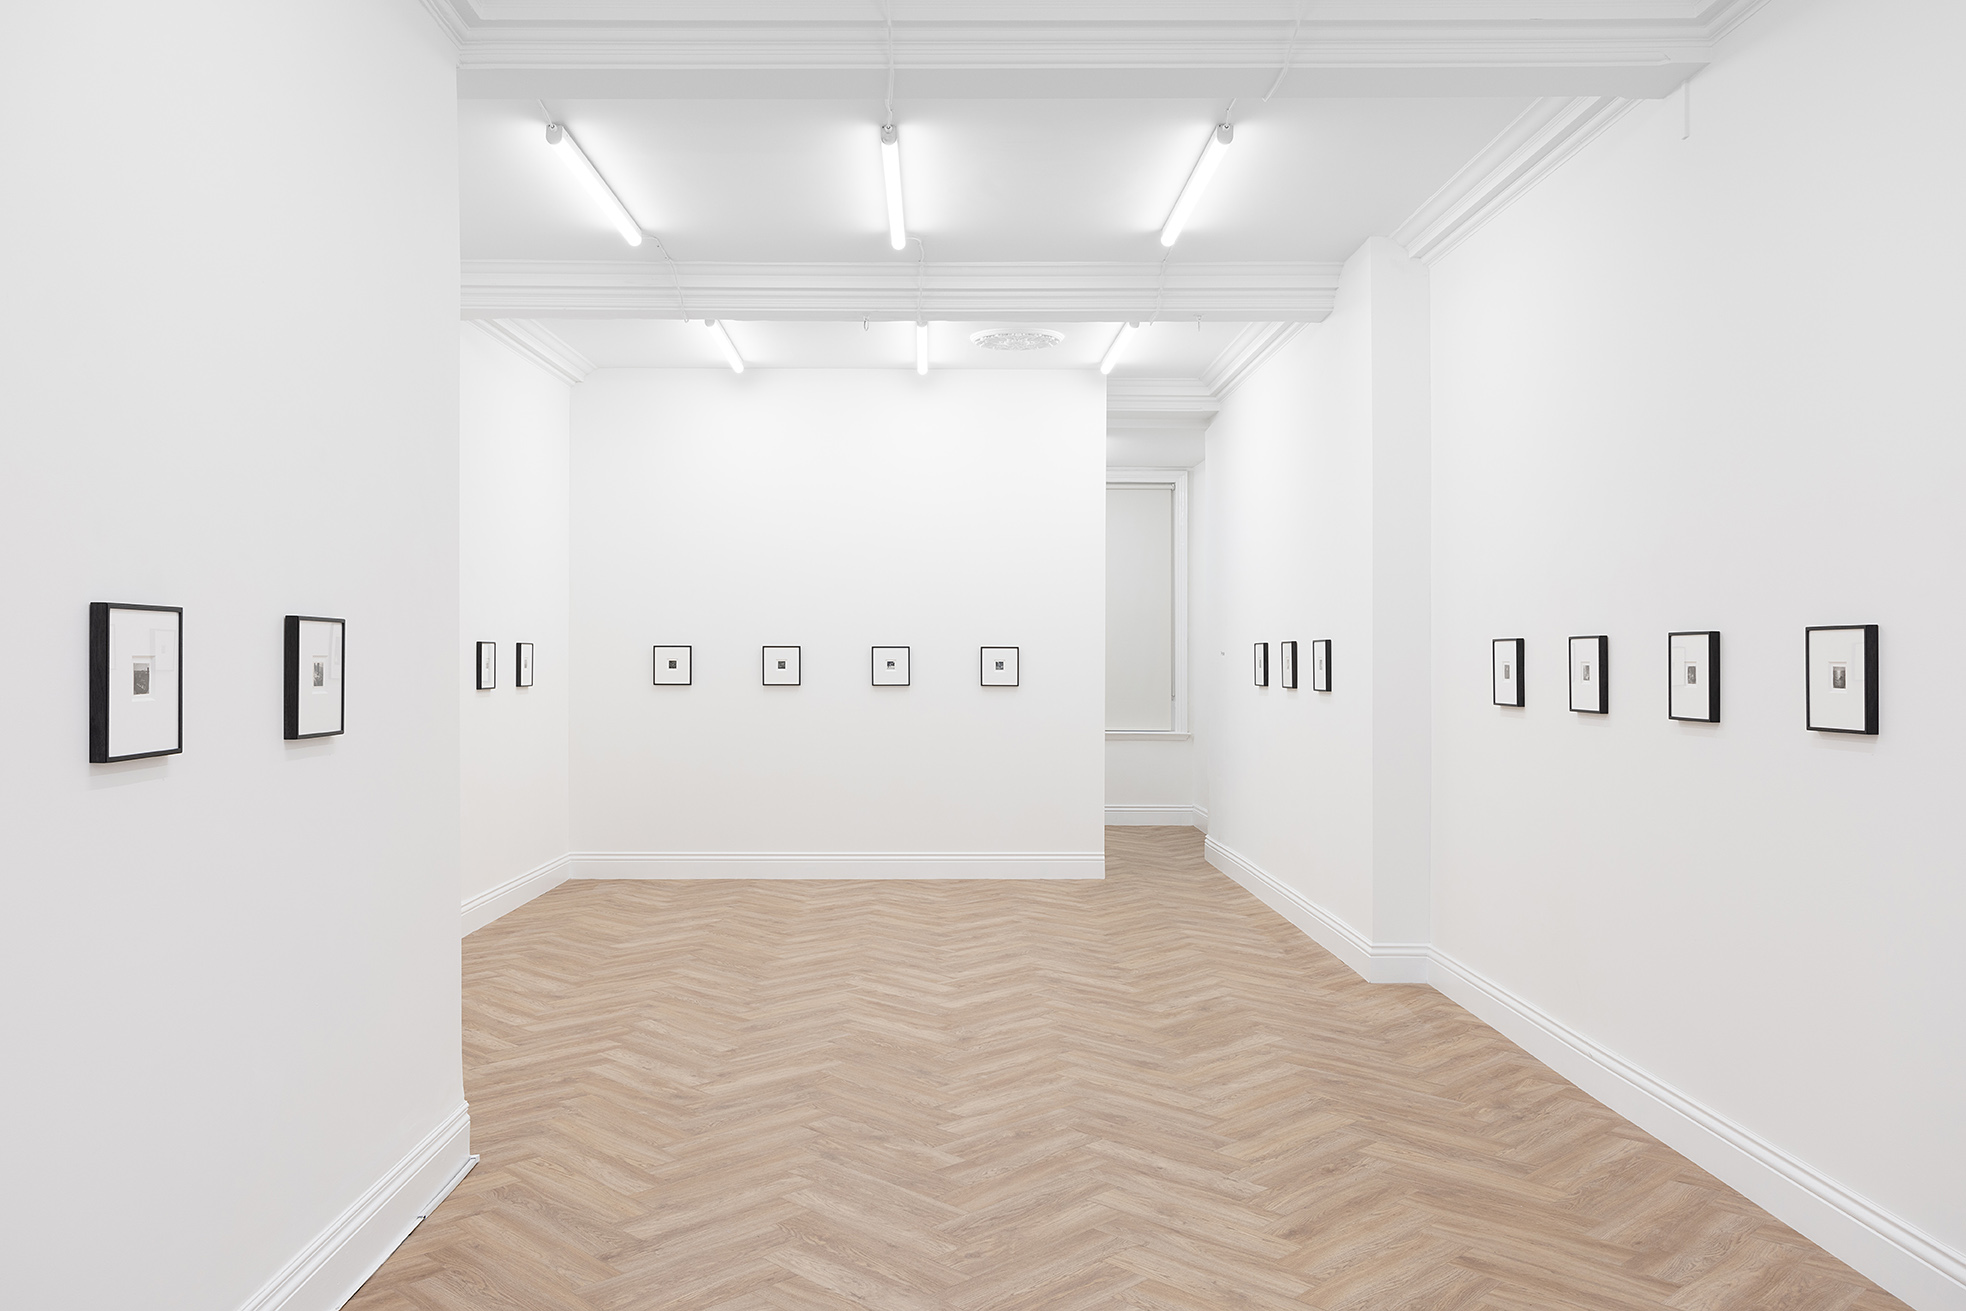 The full view of the gallery space at Huxley-Parlour Gallery's exhibition of Dora Maar's photography at 45 Maddox Street, W1S 2PE. Three white walls with early twentieth-century contact prints hung in black frames.